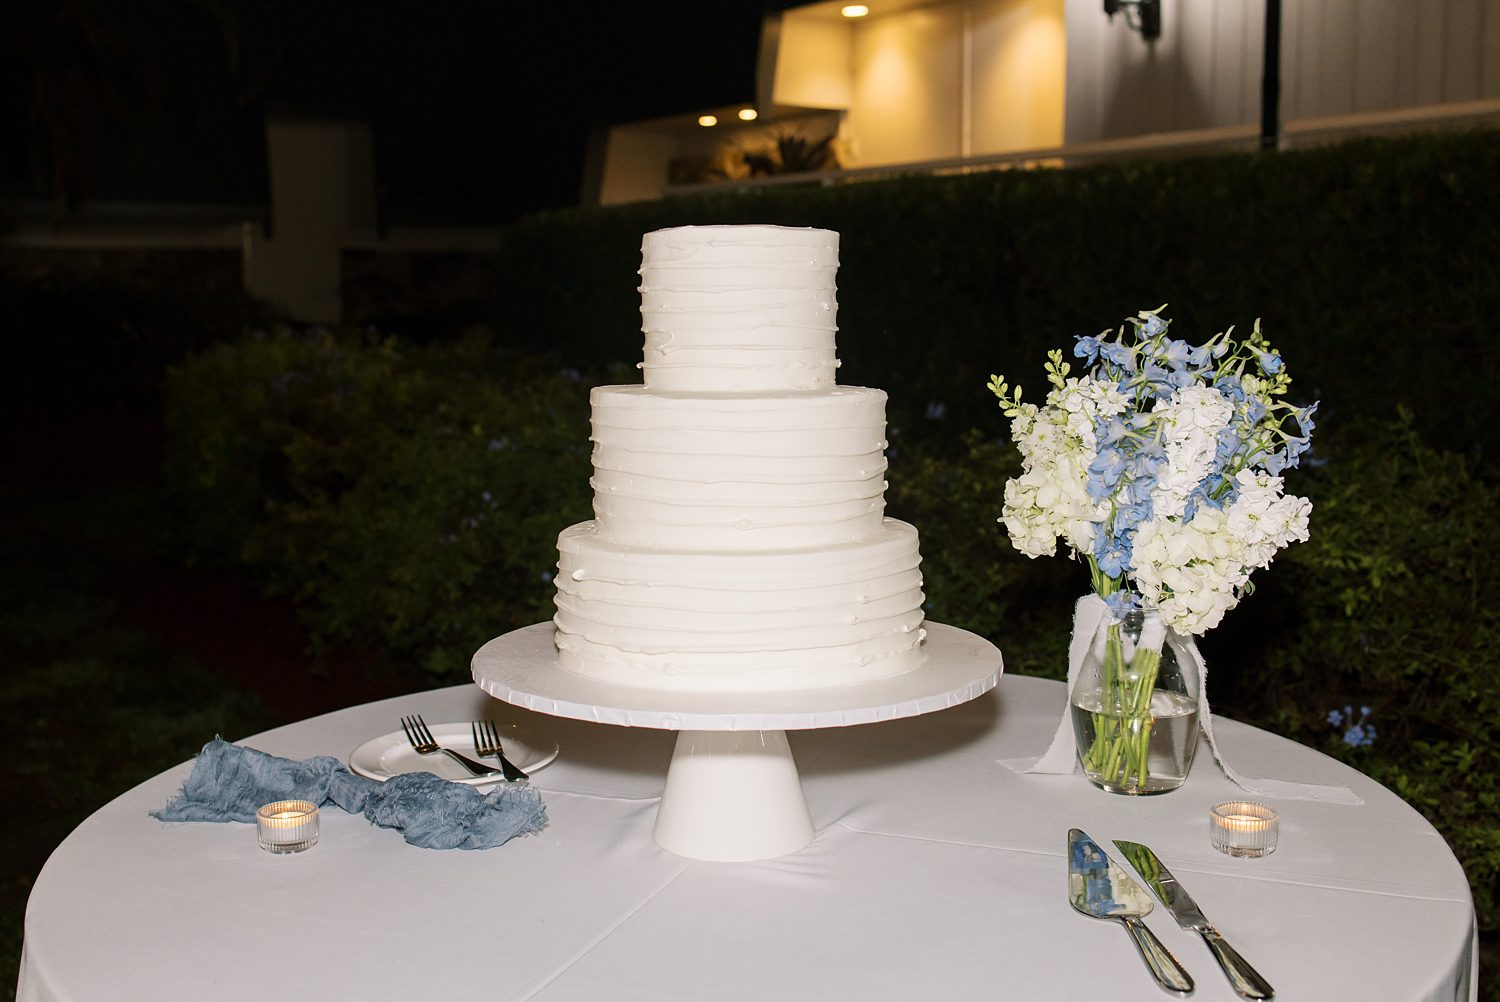 tiered wedding cake with white icing for FL wedding day